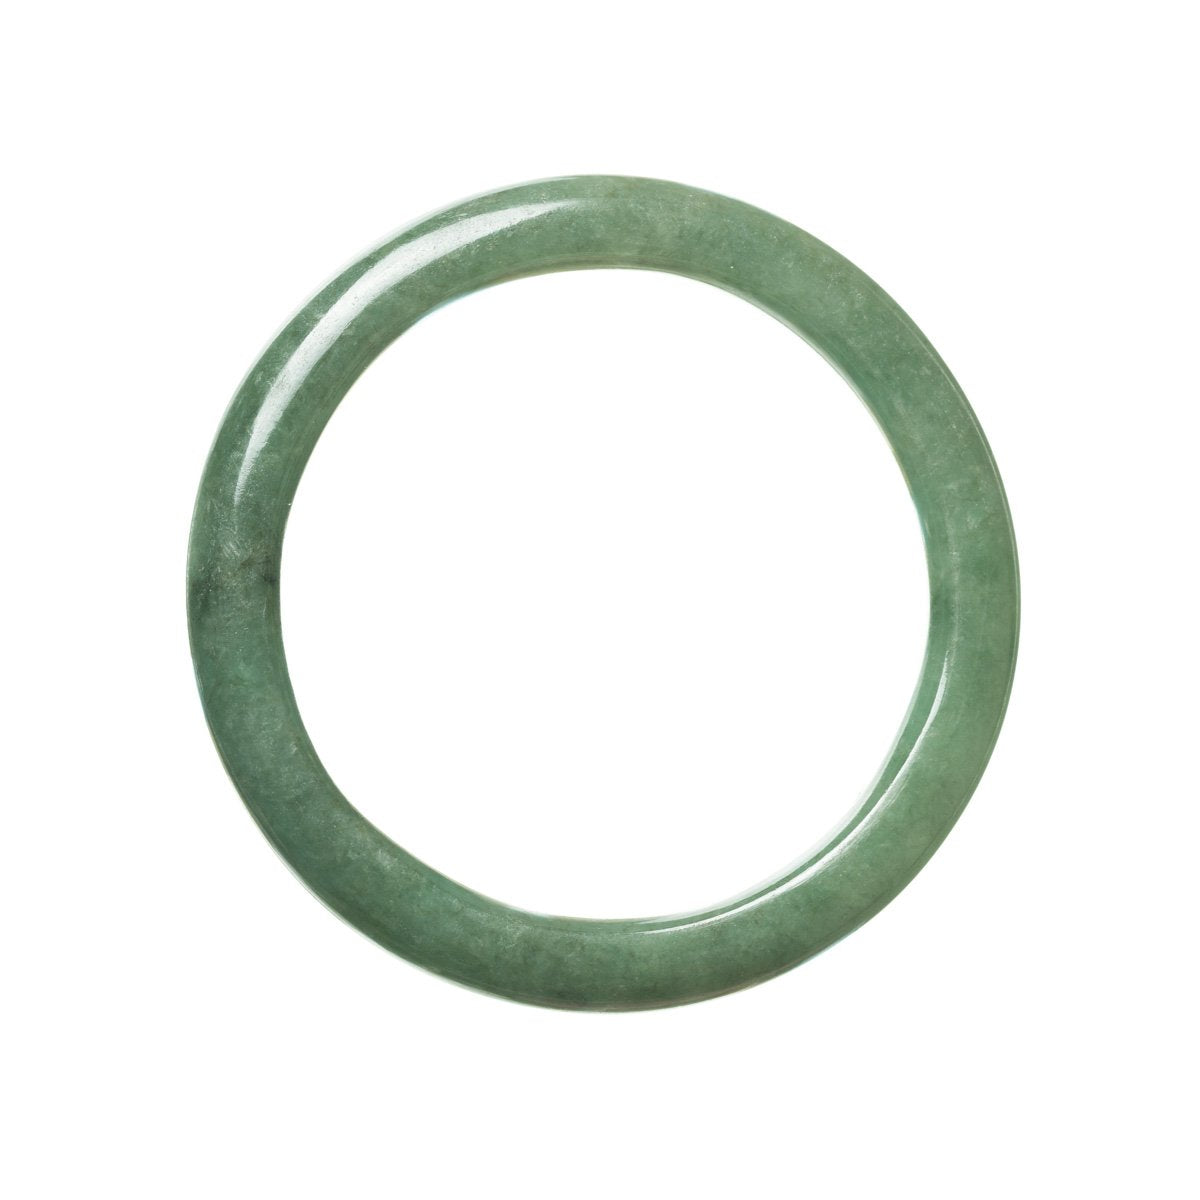 A beautiful green jadeite bangle bracelet with a semi-round shape, measuring 59mm. Perfect for adding a touch of elegance to any outfit.